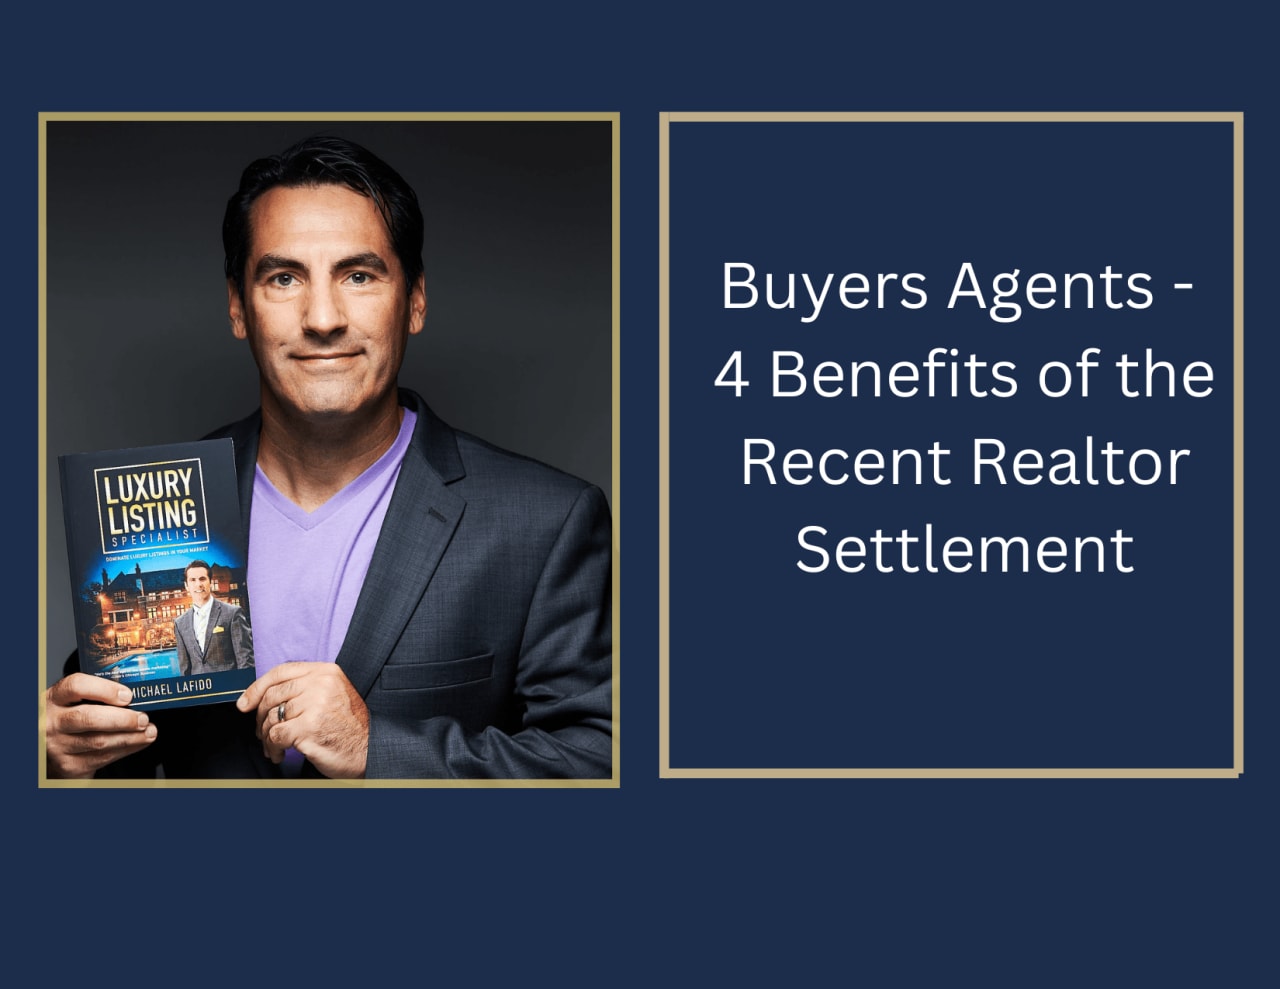 Buyers Agents - 4 Benefits of the Recent Realtor Settlement